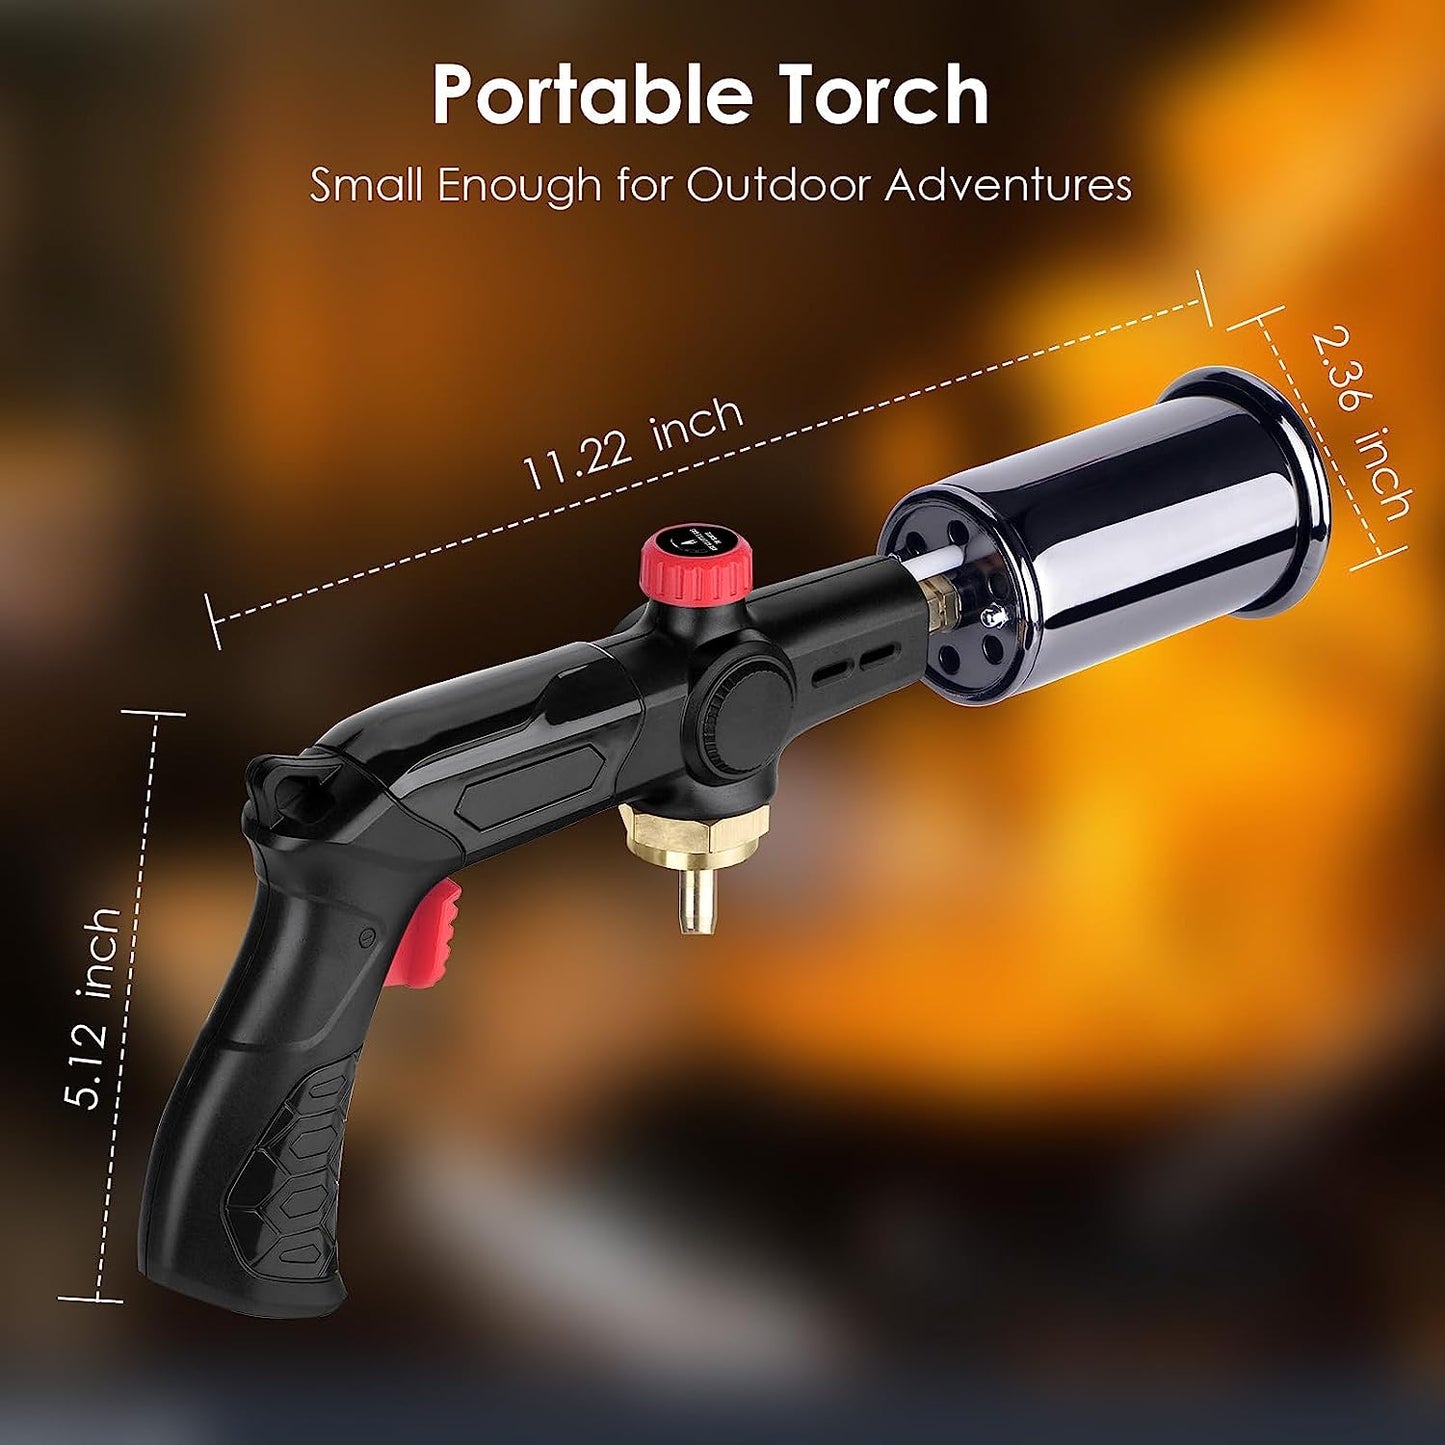 POWERFUL Kitchen Cooking Torch-Propane Torch-Sous Vide-Charcoal Torch Lighter - Grilling Culinary Kitchen Torch for BBQ Searing Steak,Creme Brulee,Campfire Charcoal Starter (Propane Tank Not Included)